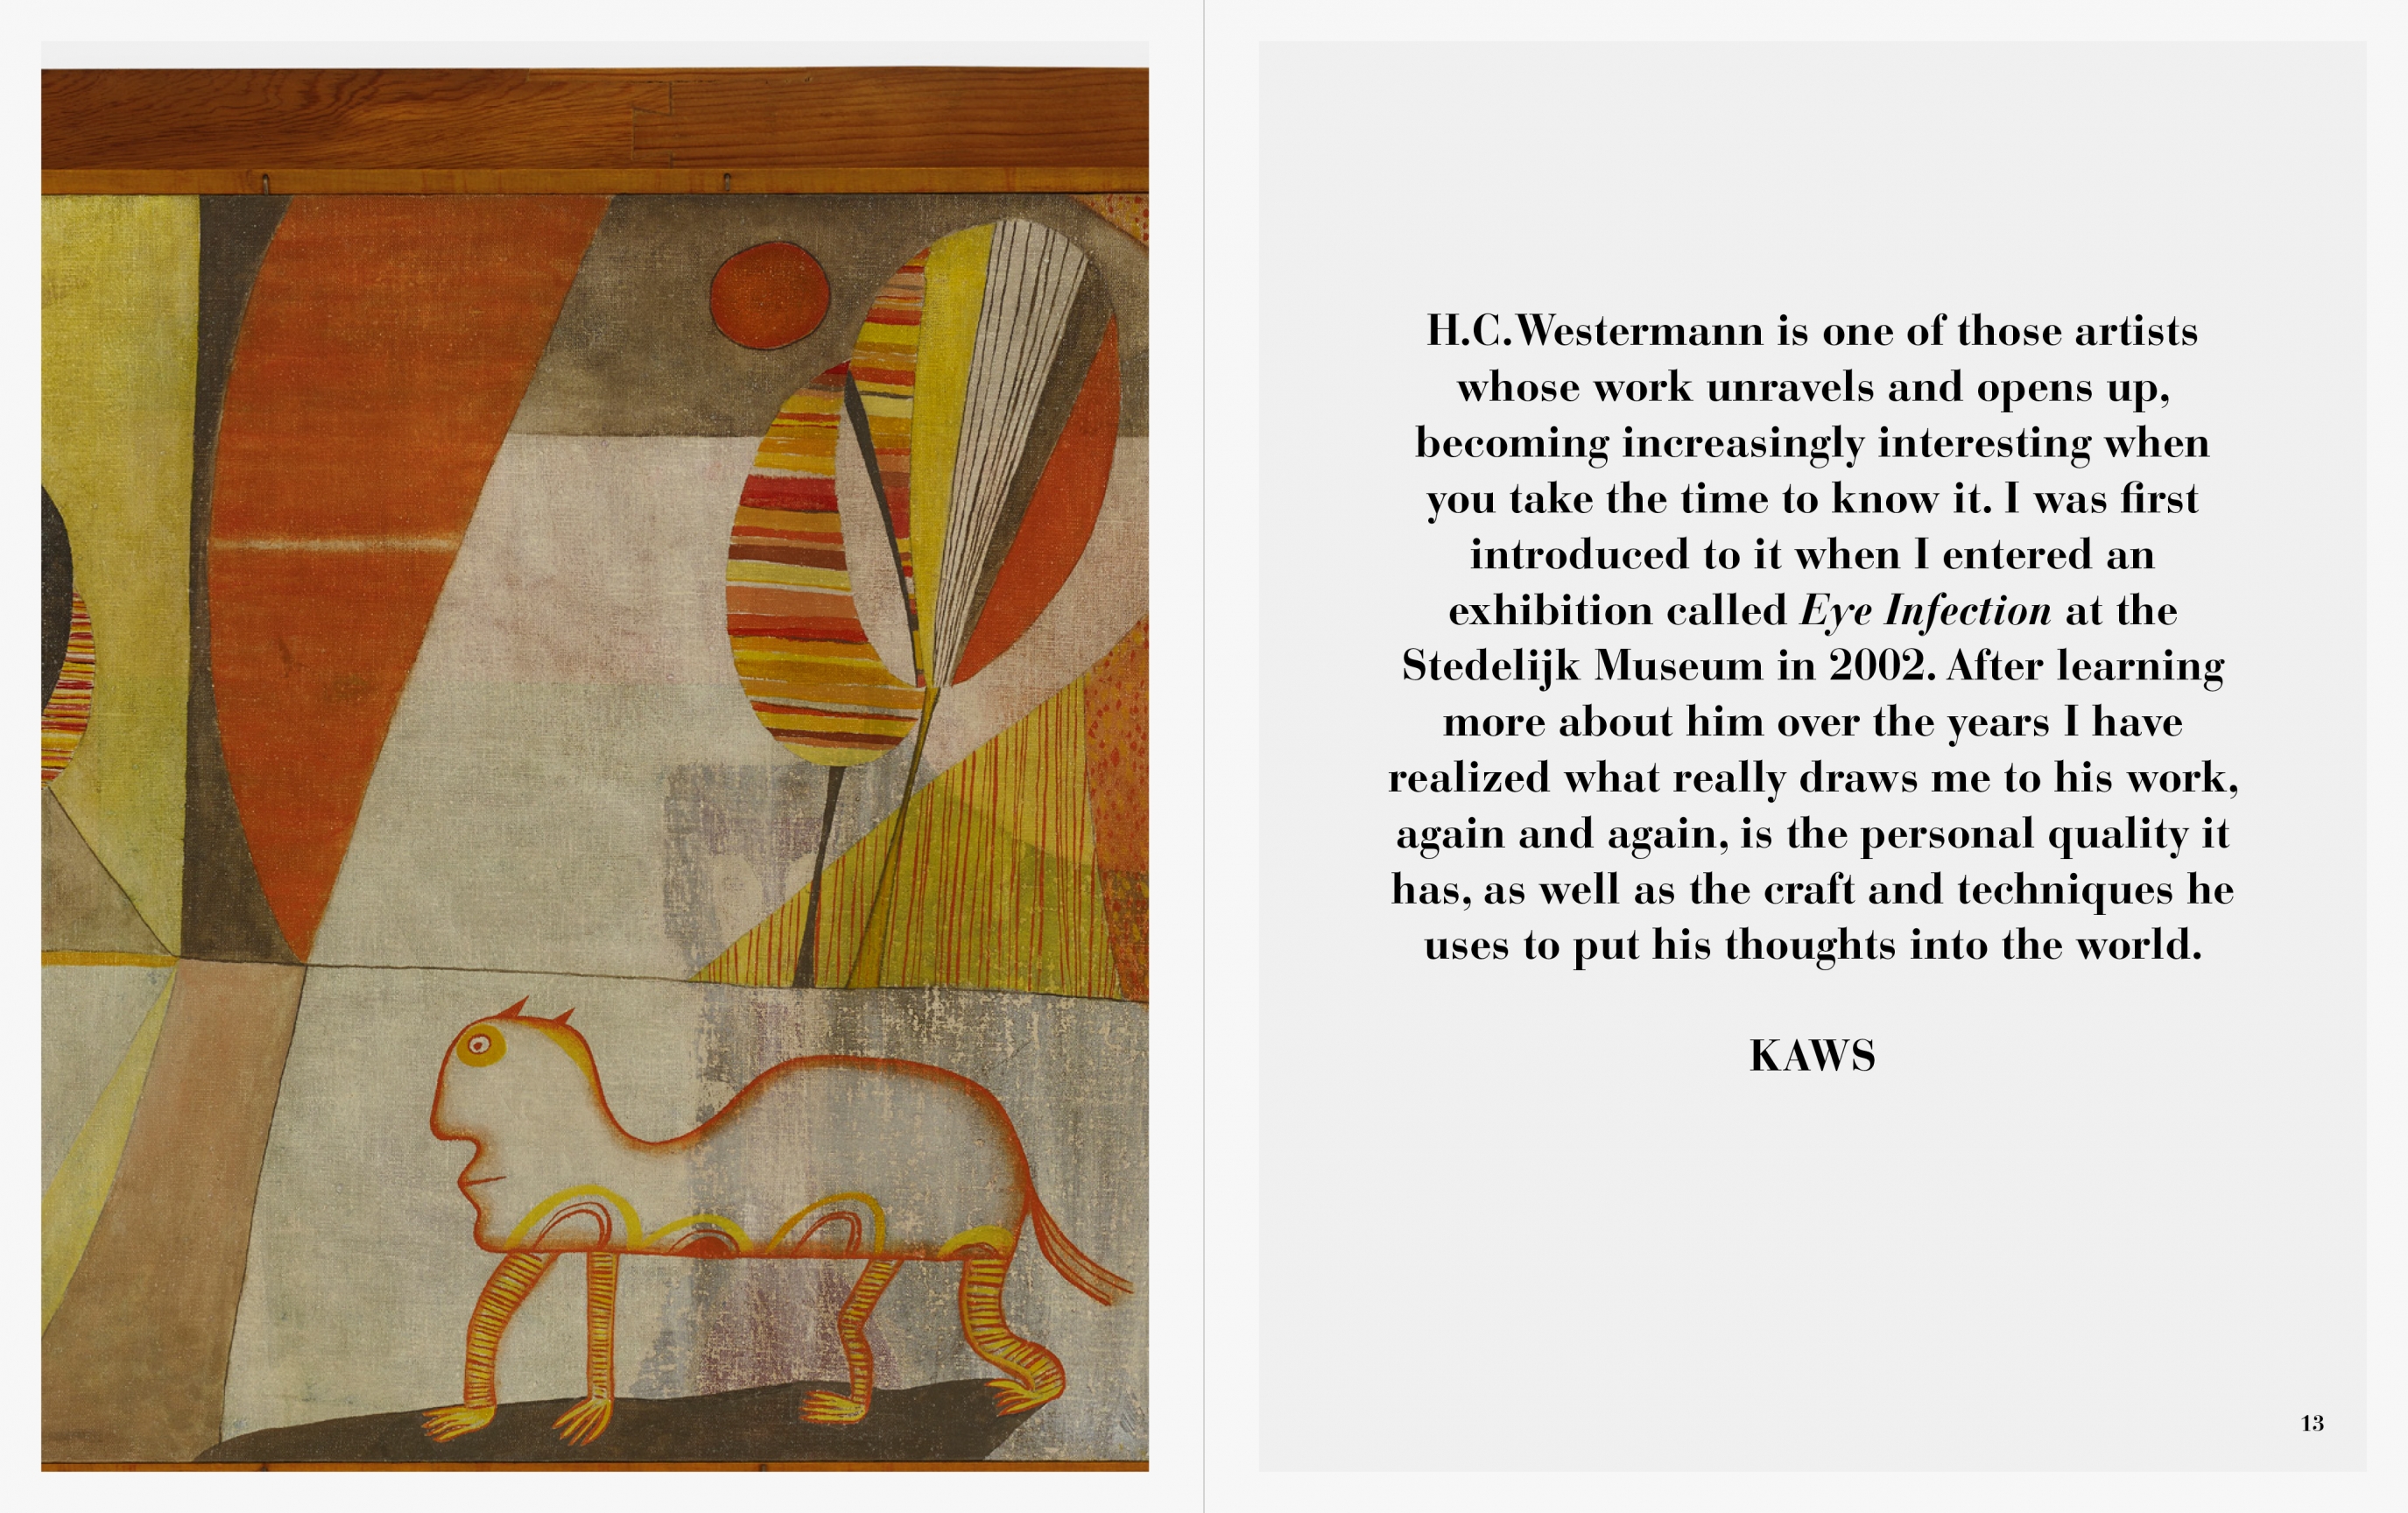 Interior view of of H.C. Westermann, published by Venus Over Manhattan, New York, 2016